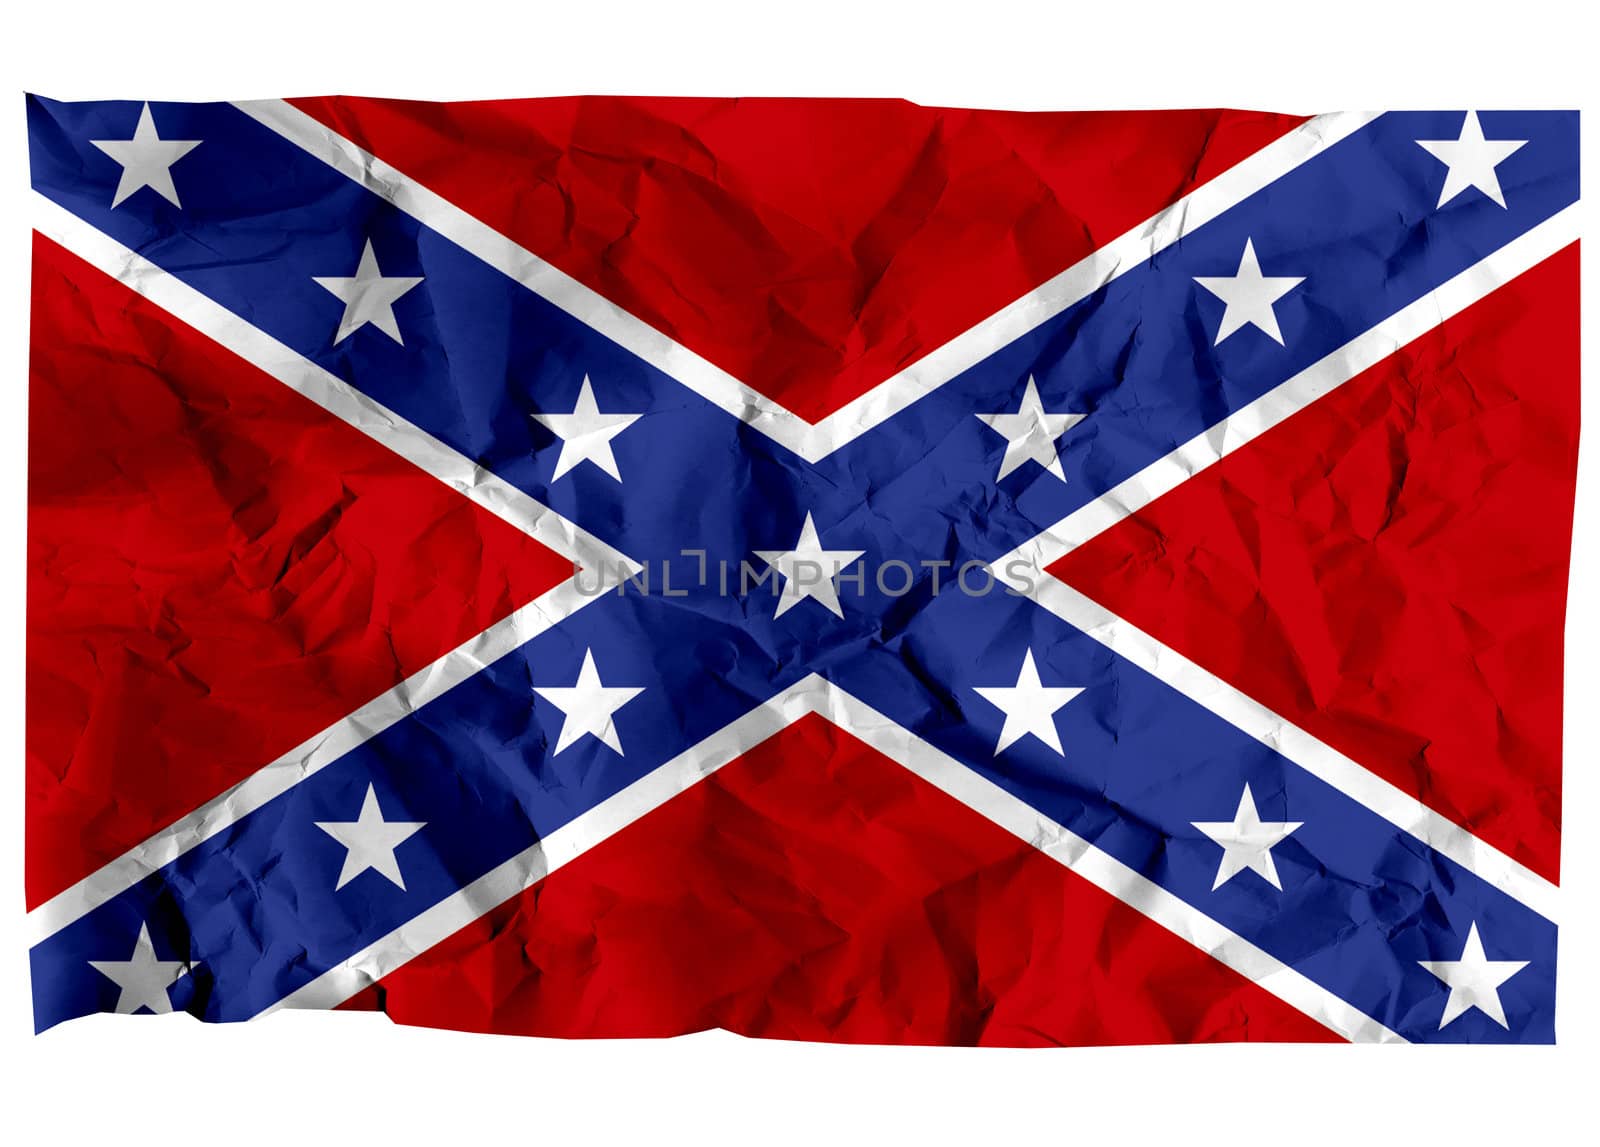 Confederate Flag at the time of the Civil War in America (1861–1865).